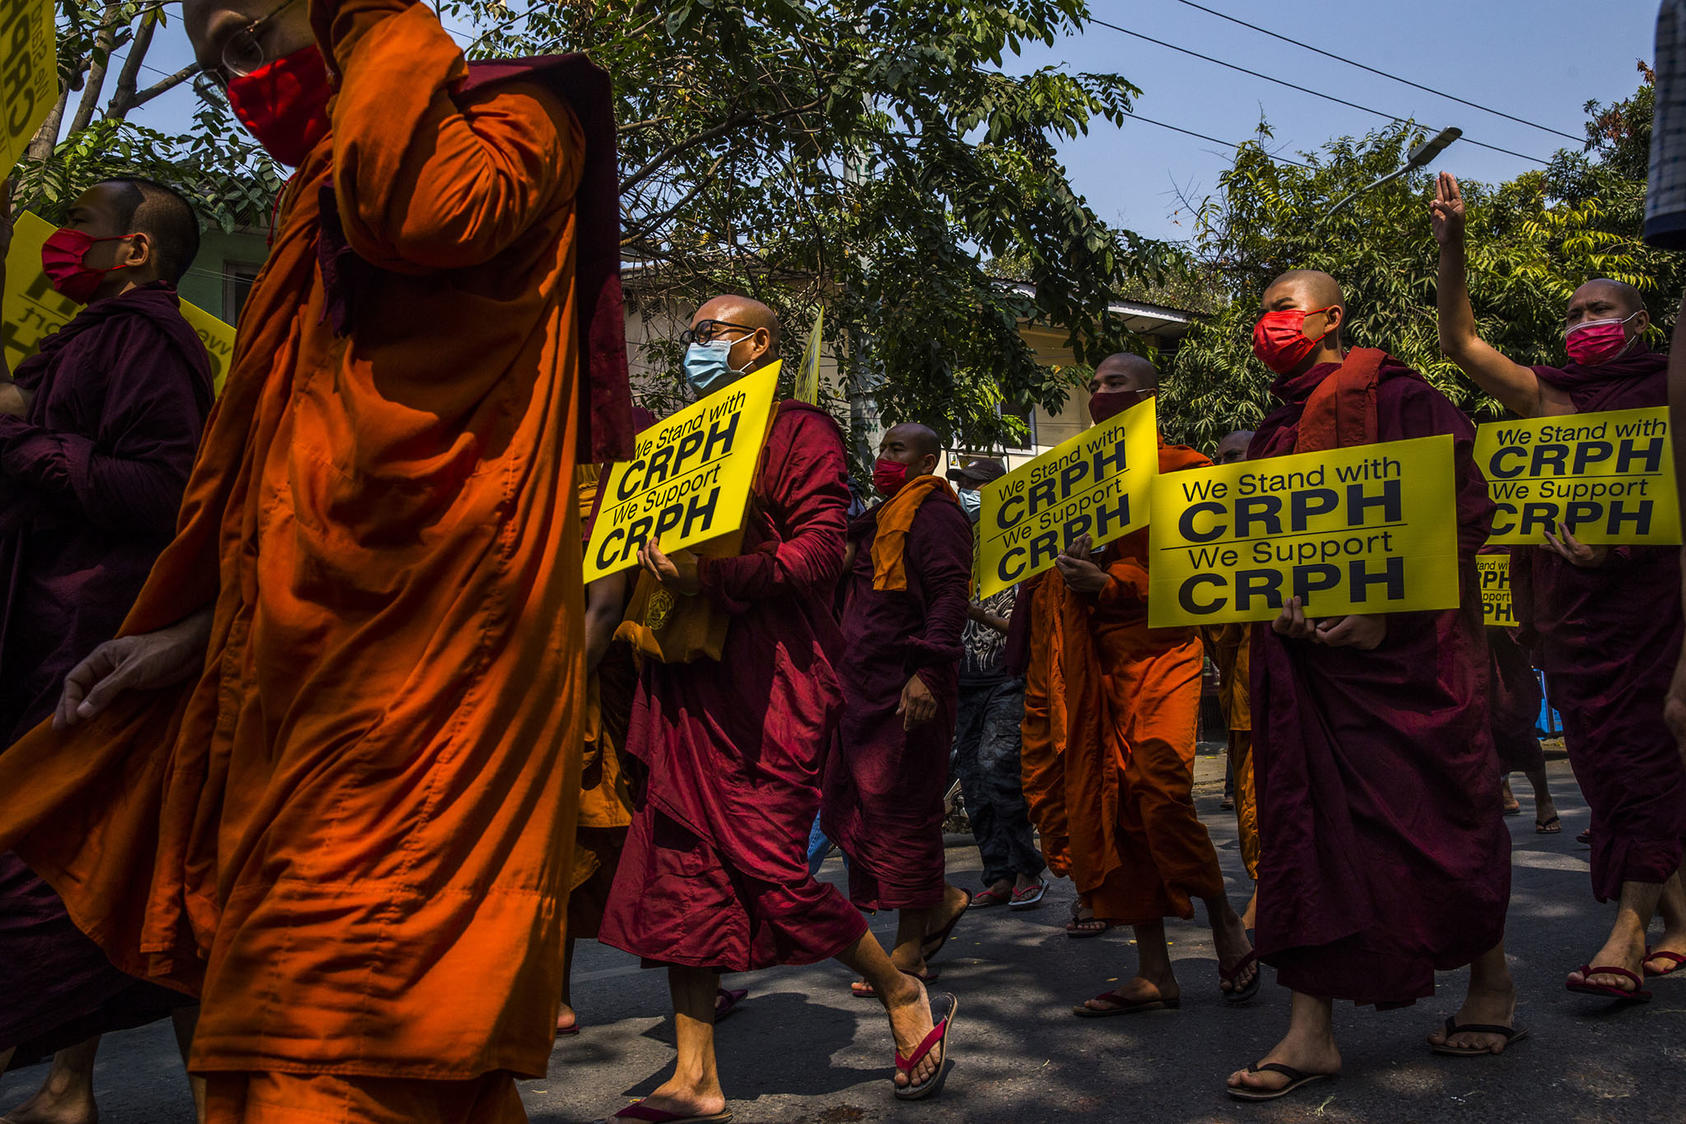 Buddhist monks protest the army coup of Myanmar in Mandalay, Feb. 27, 2021. However, monks have been less involved than they were in previous movements, such as the monk-led 2007 Saffron Revolution. (The New York Times)